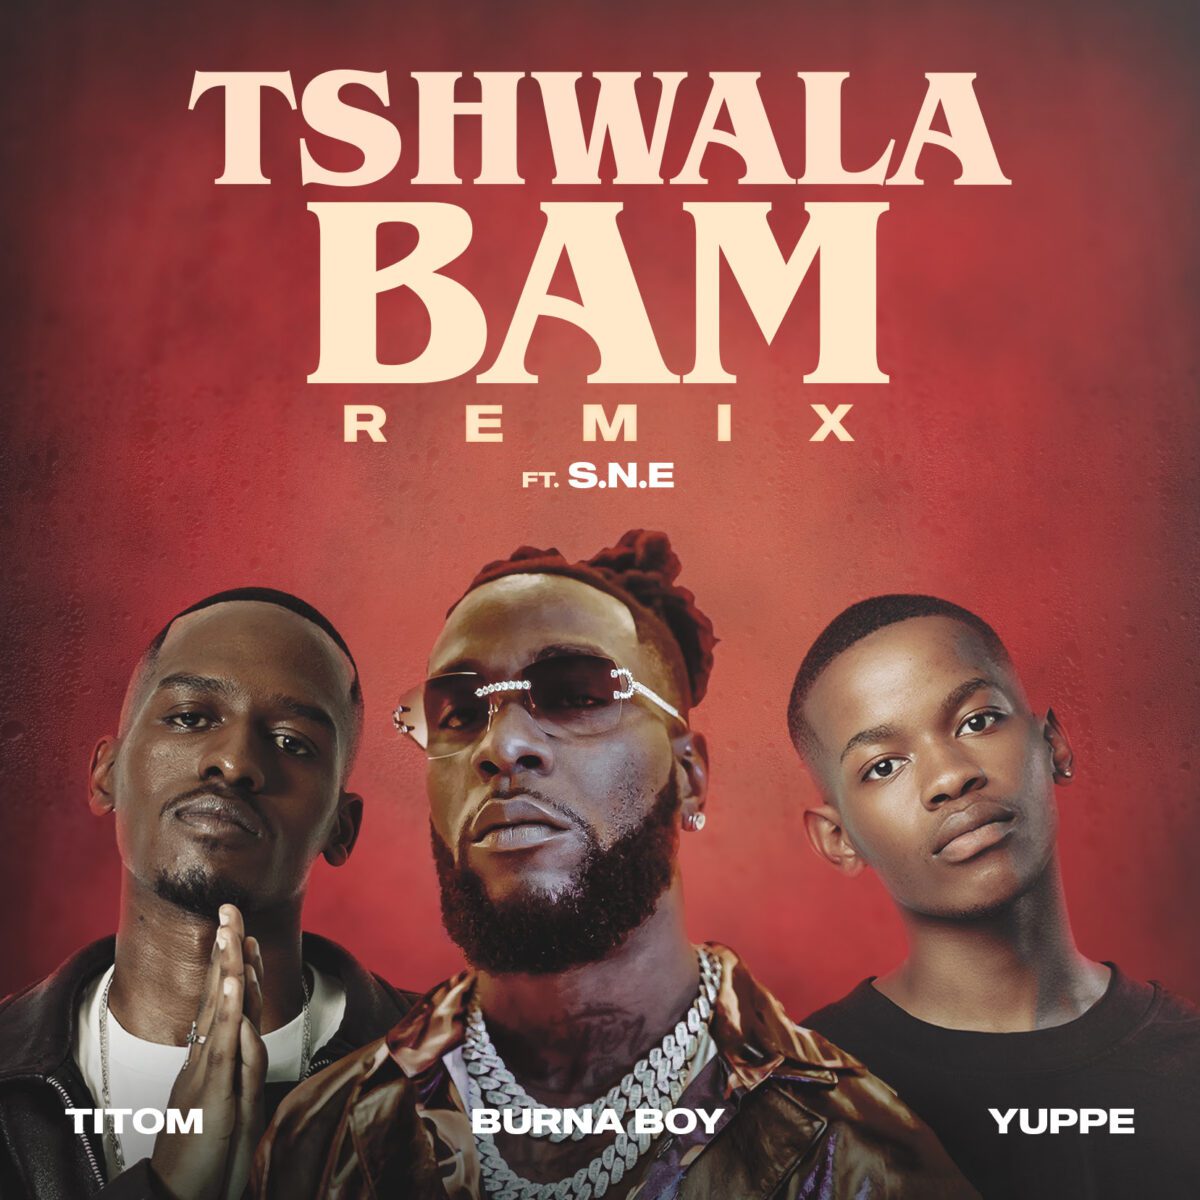 Burna Boy Joins Forces for Electrifying "Tshwala Bam" Remix Video Release